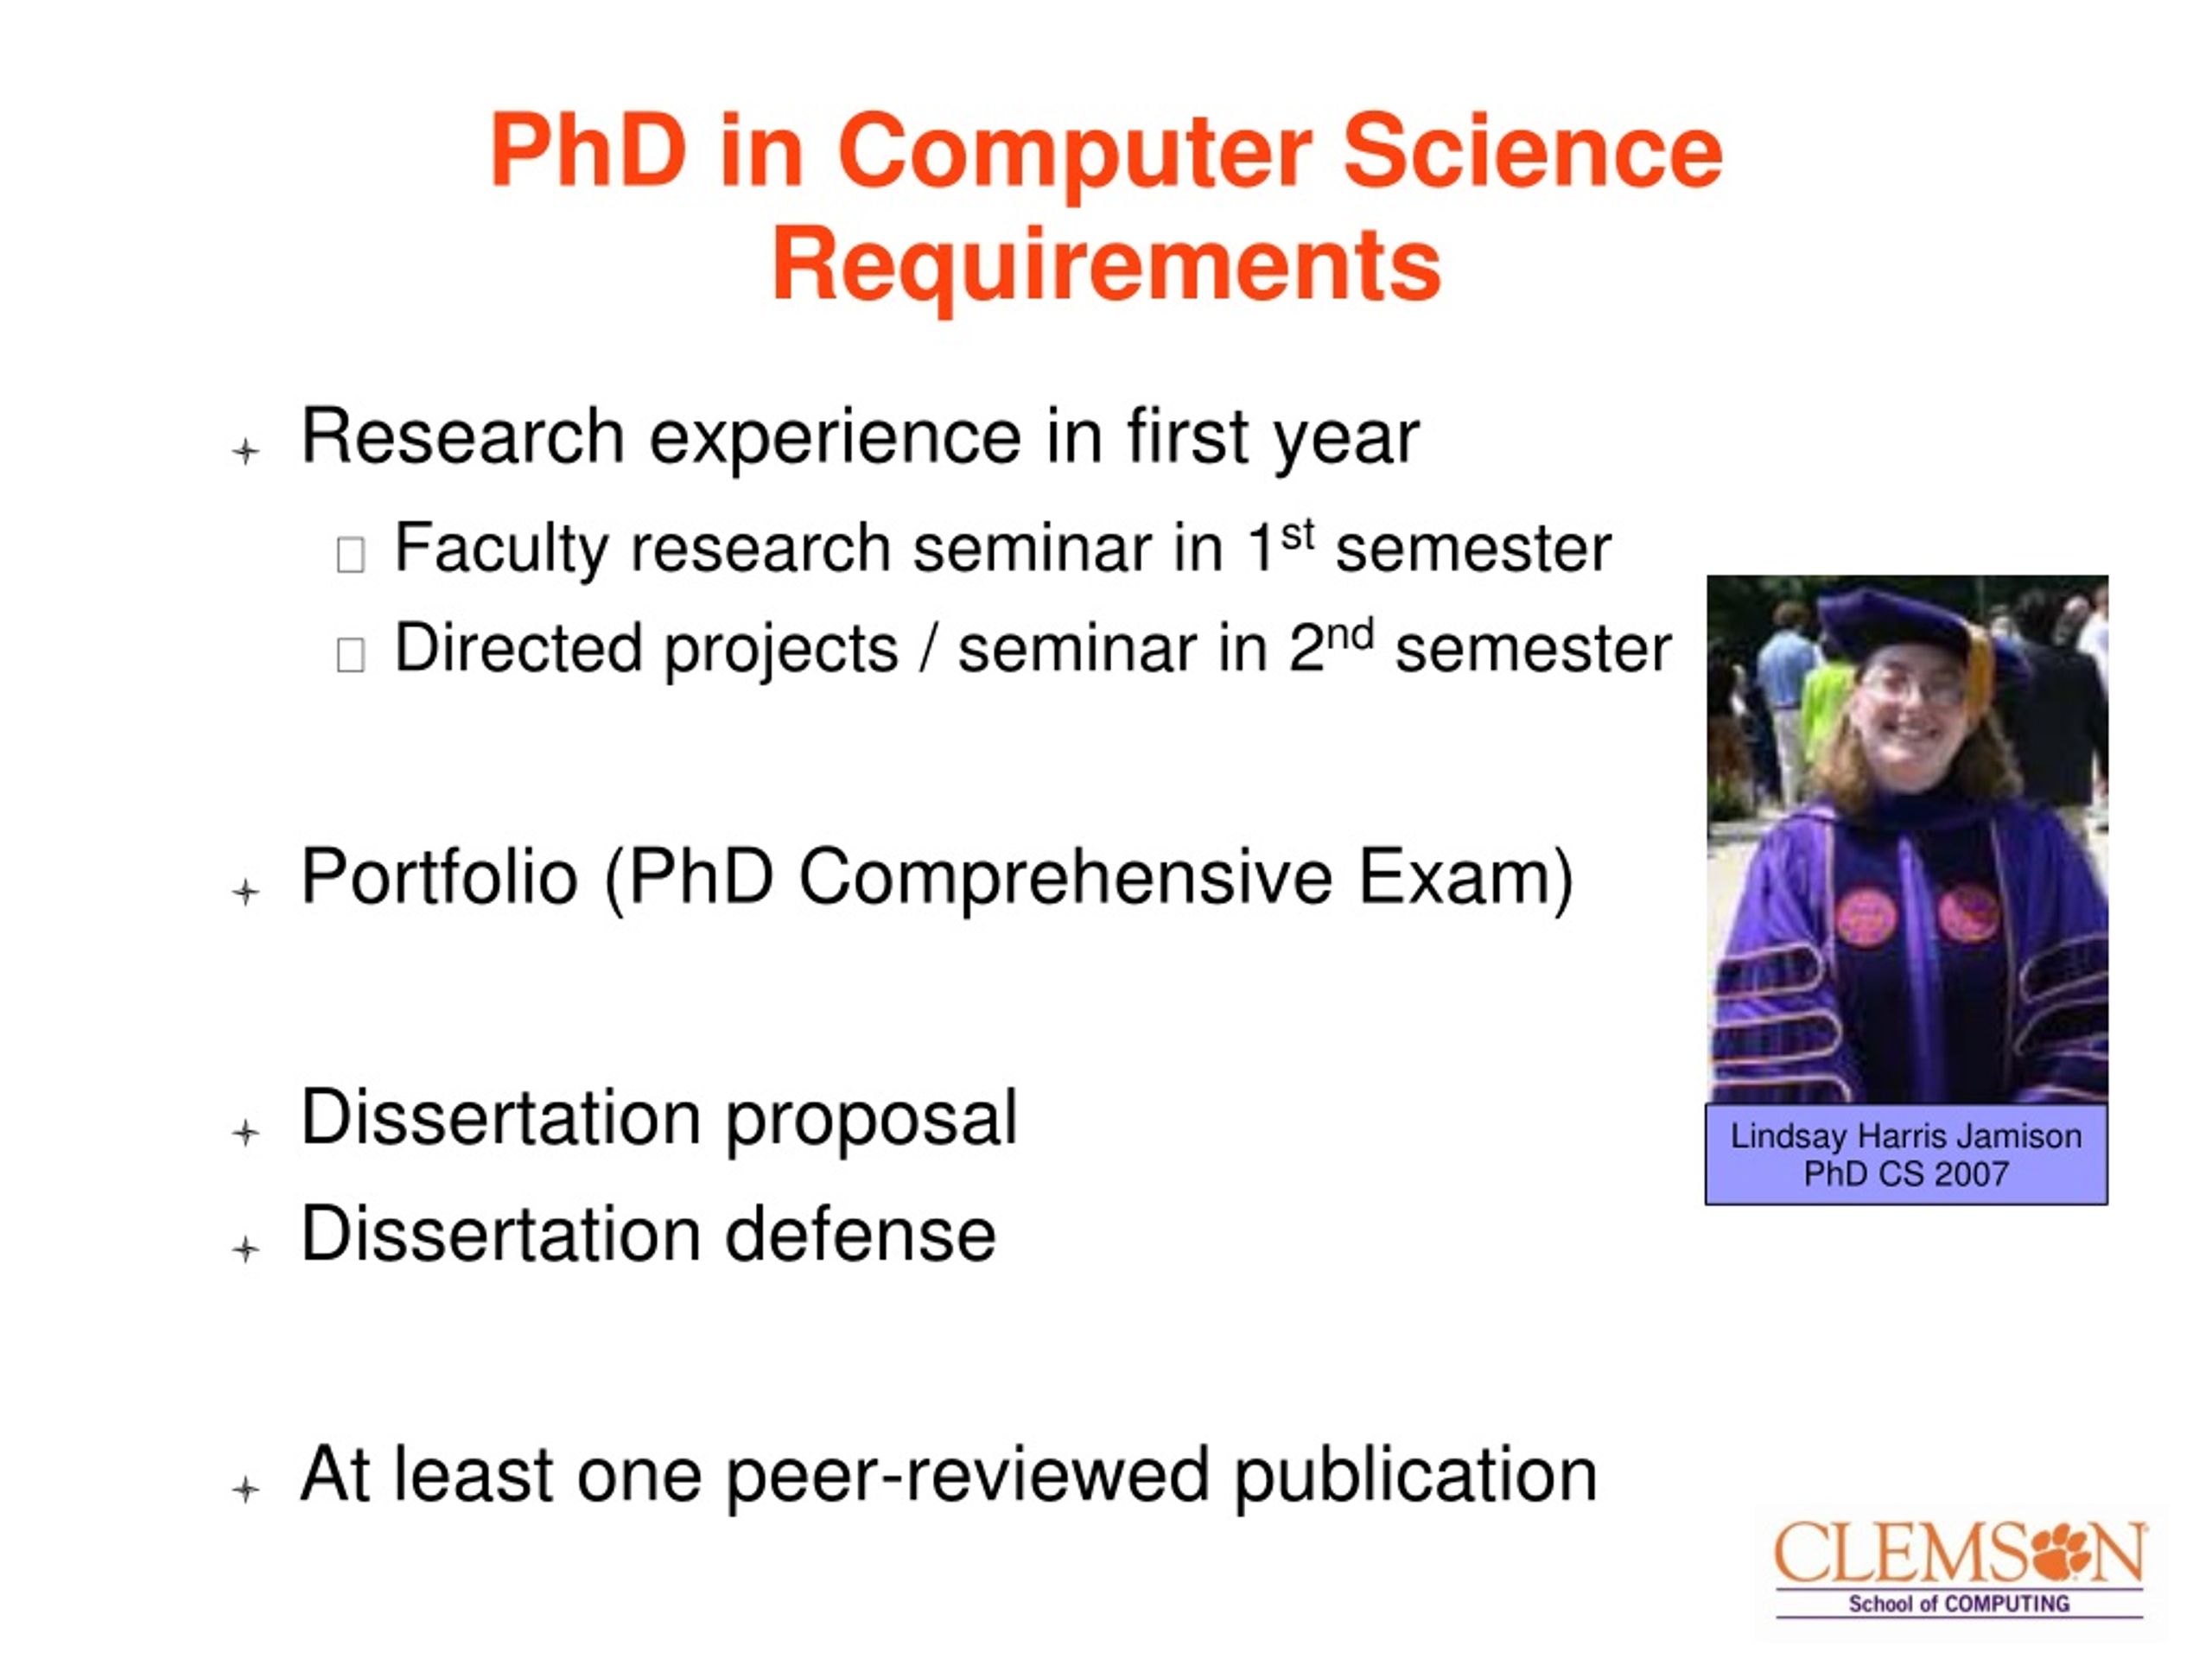 mit phd computer science requirements